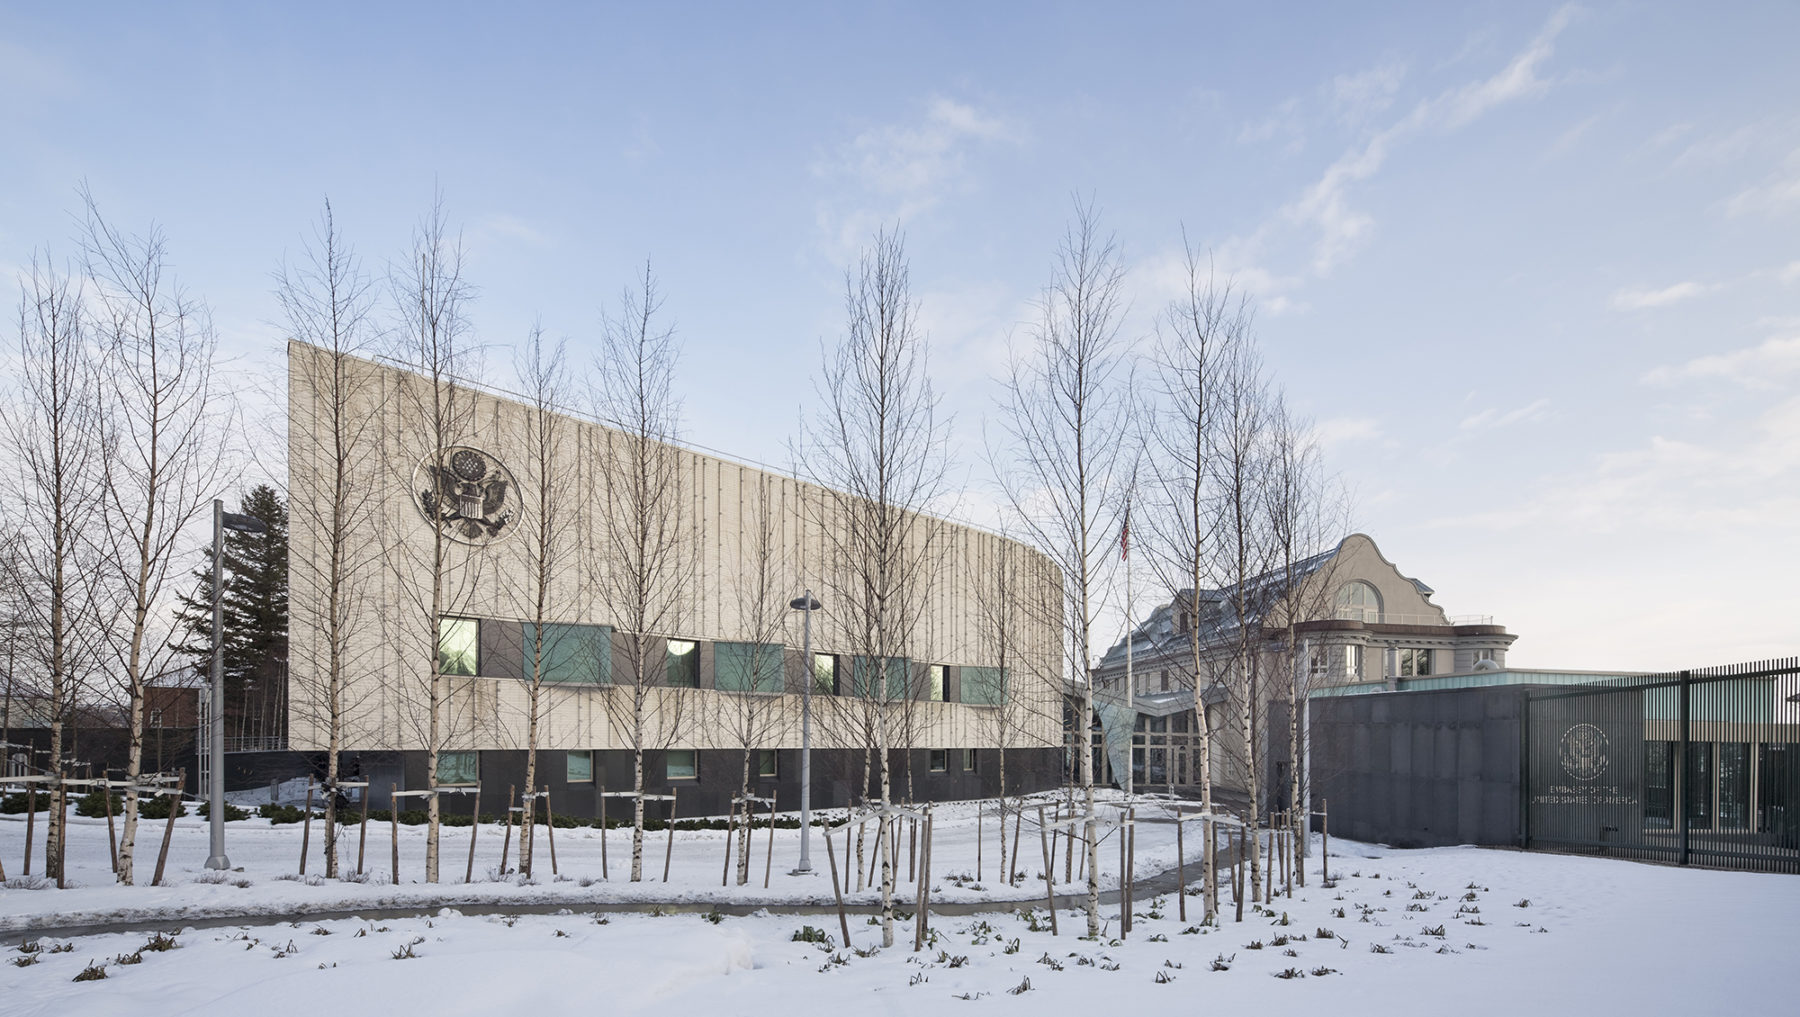 winter photo of embassy showing snow on the ground and barren trees